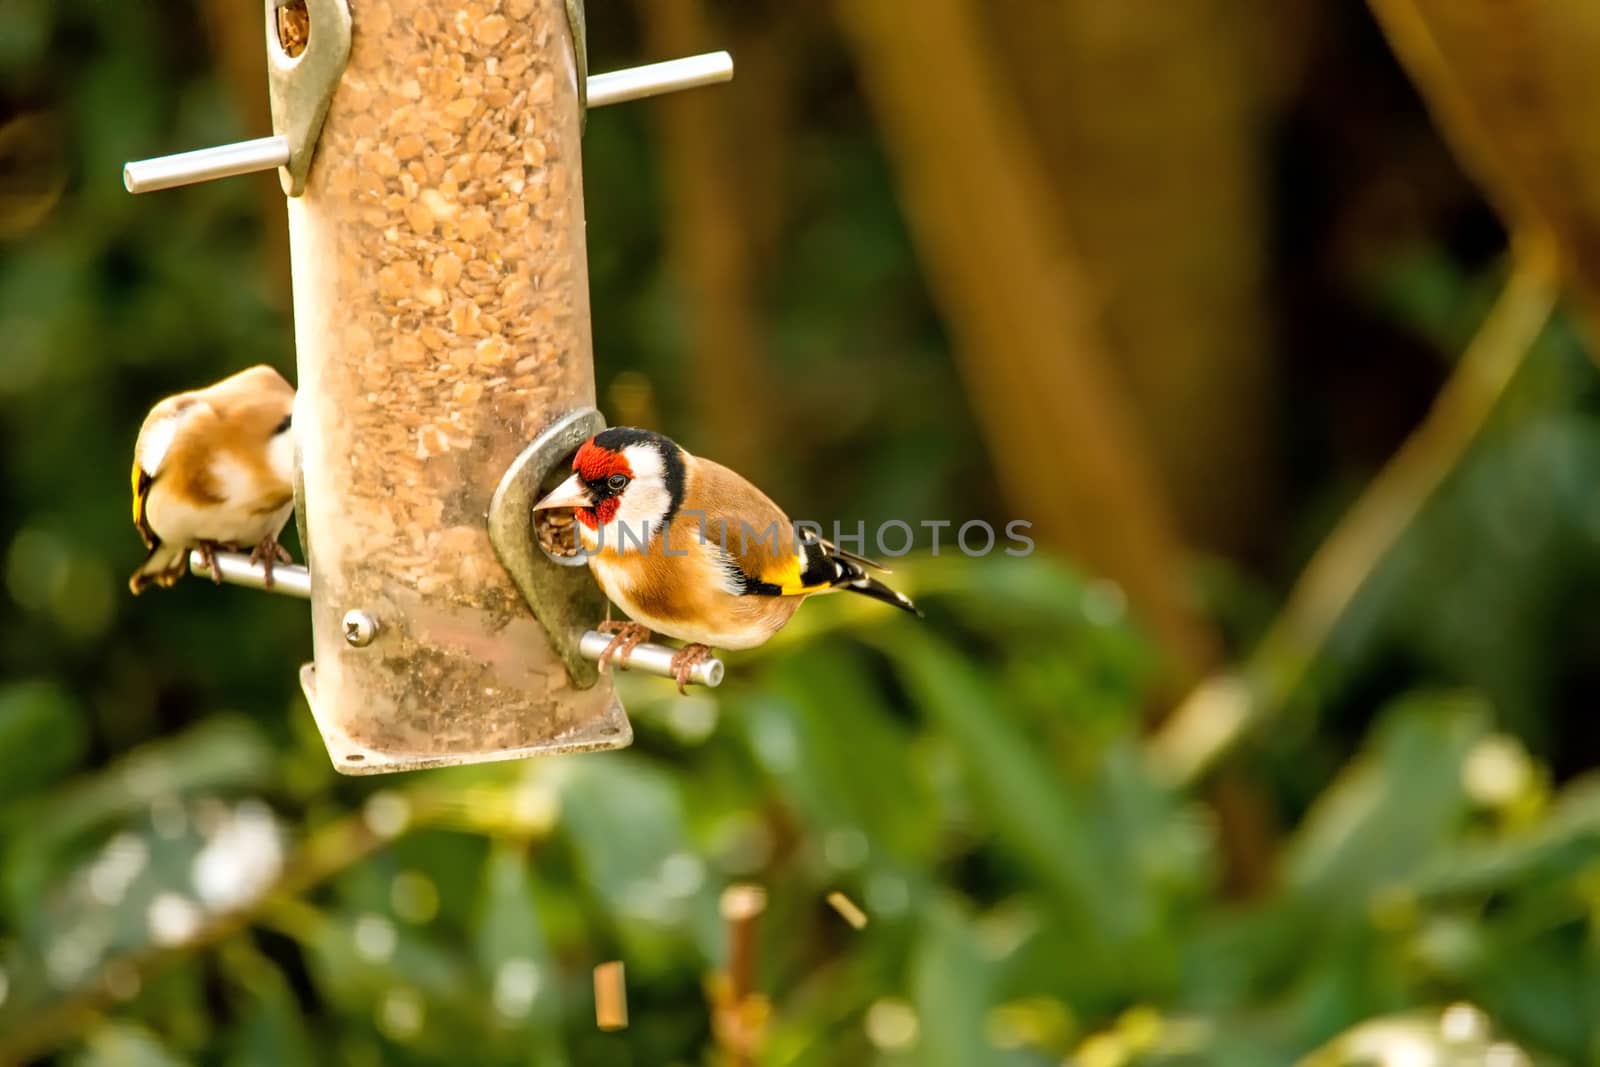 The European goldfinch at a fodder house in Germany